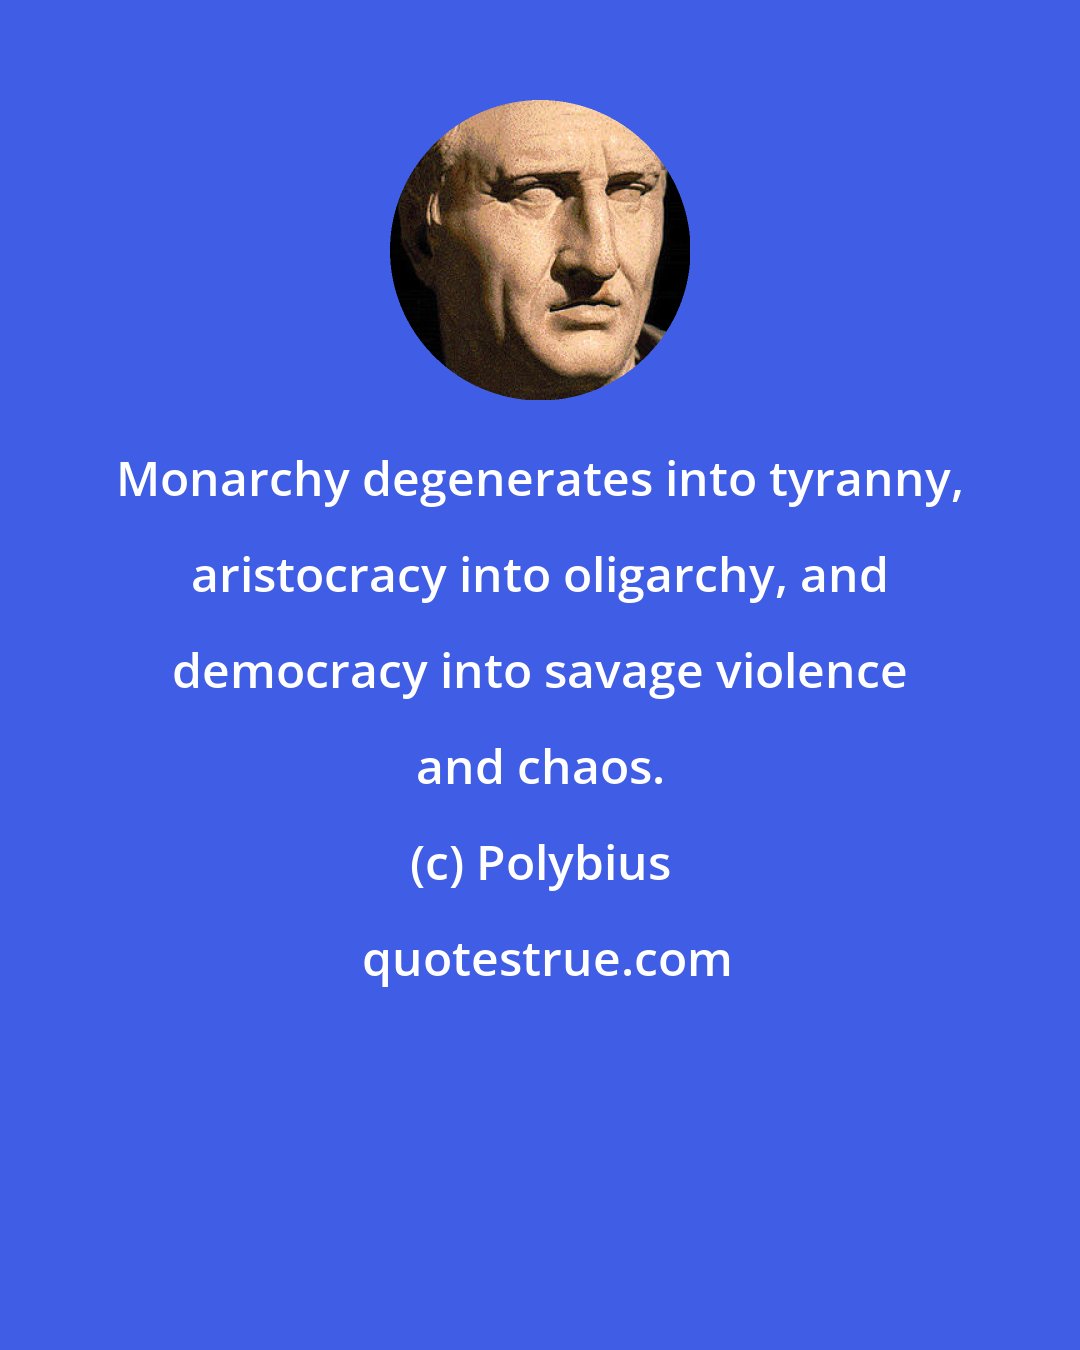 Polybius: Monarchy degenerates into tyranny, aristocracy into oligarchy, and democracy into savage violence and chaos.